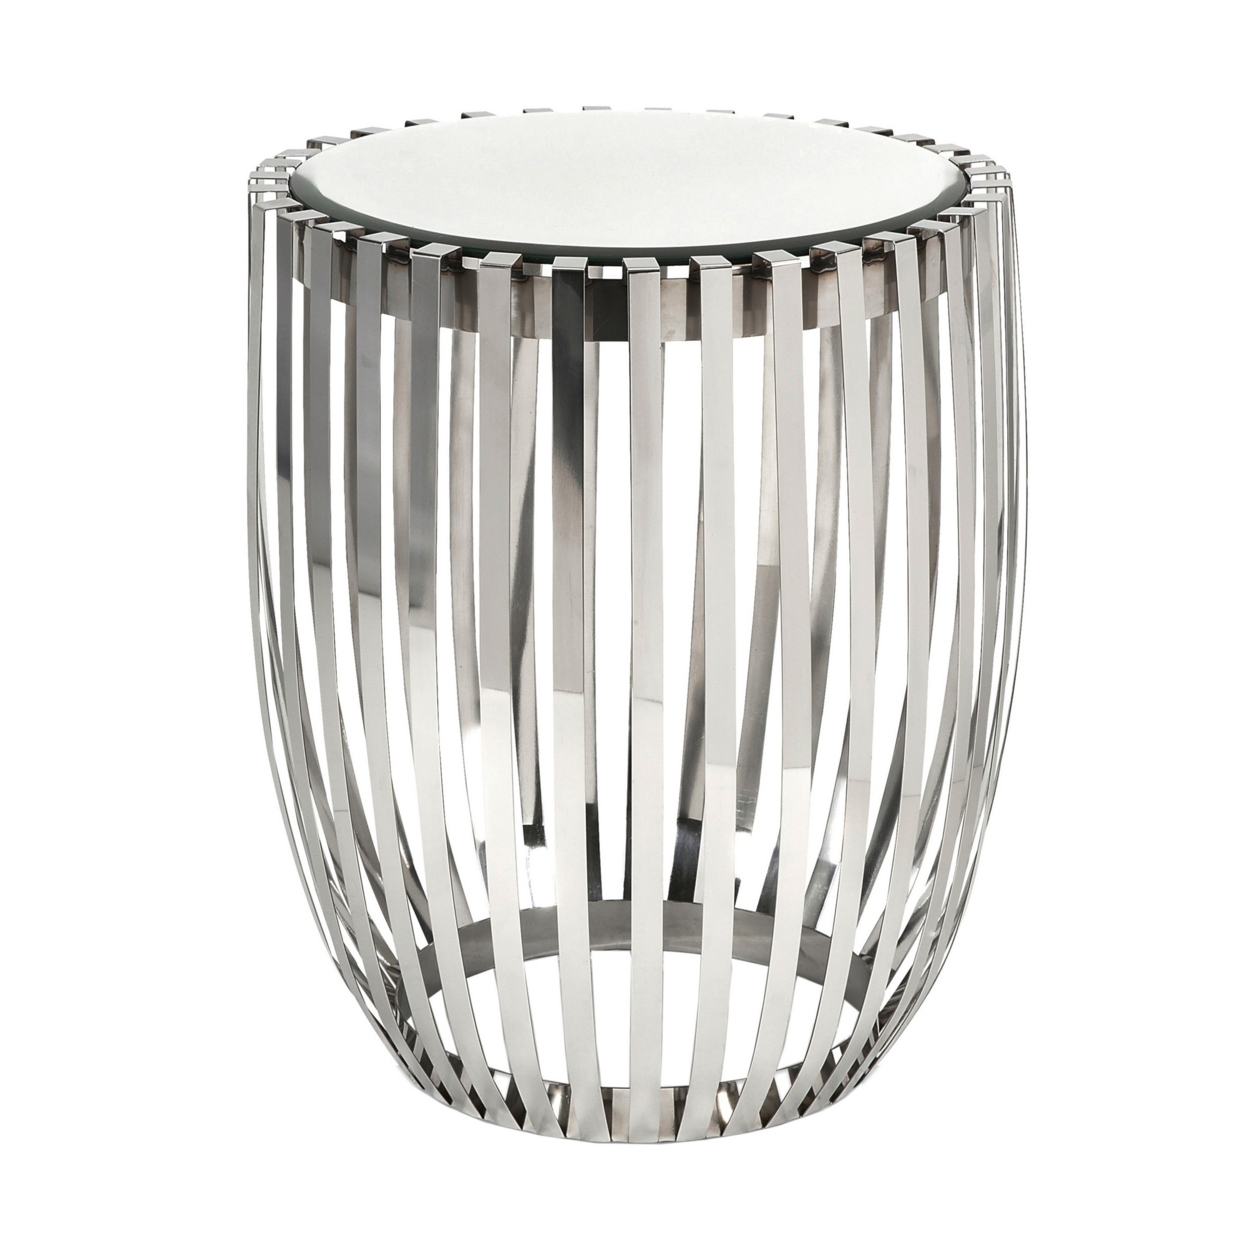 23 Inch Accent Side Table, Polished Steel Ribs, Drum, Mirrored Top, Silver, Saltoro Sherpi